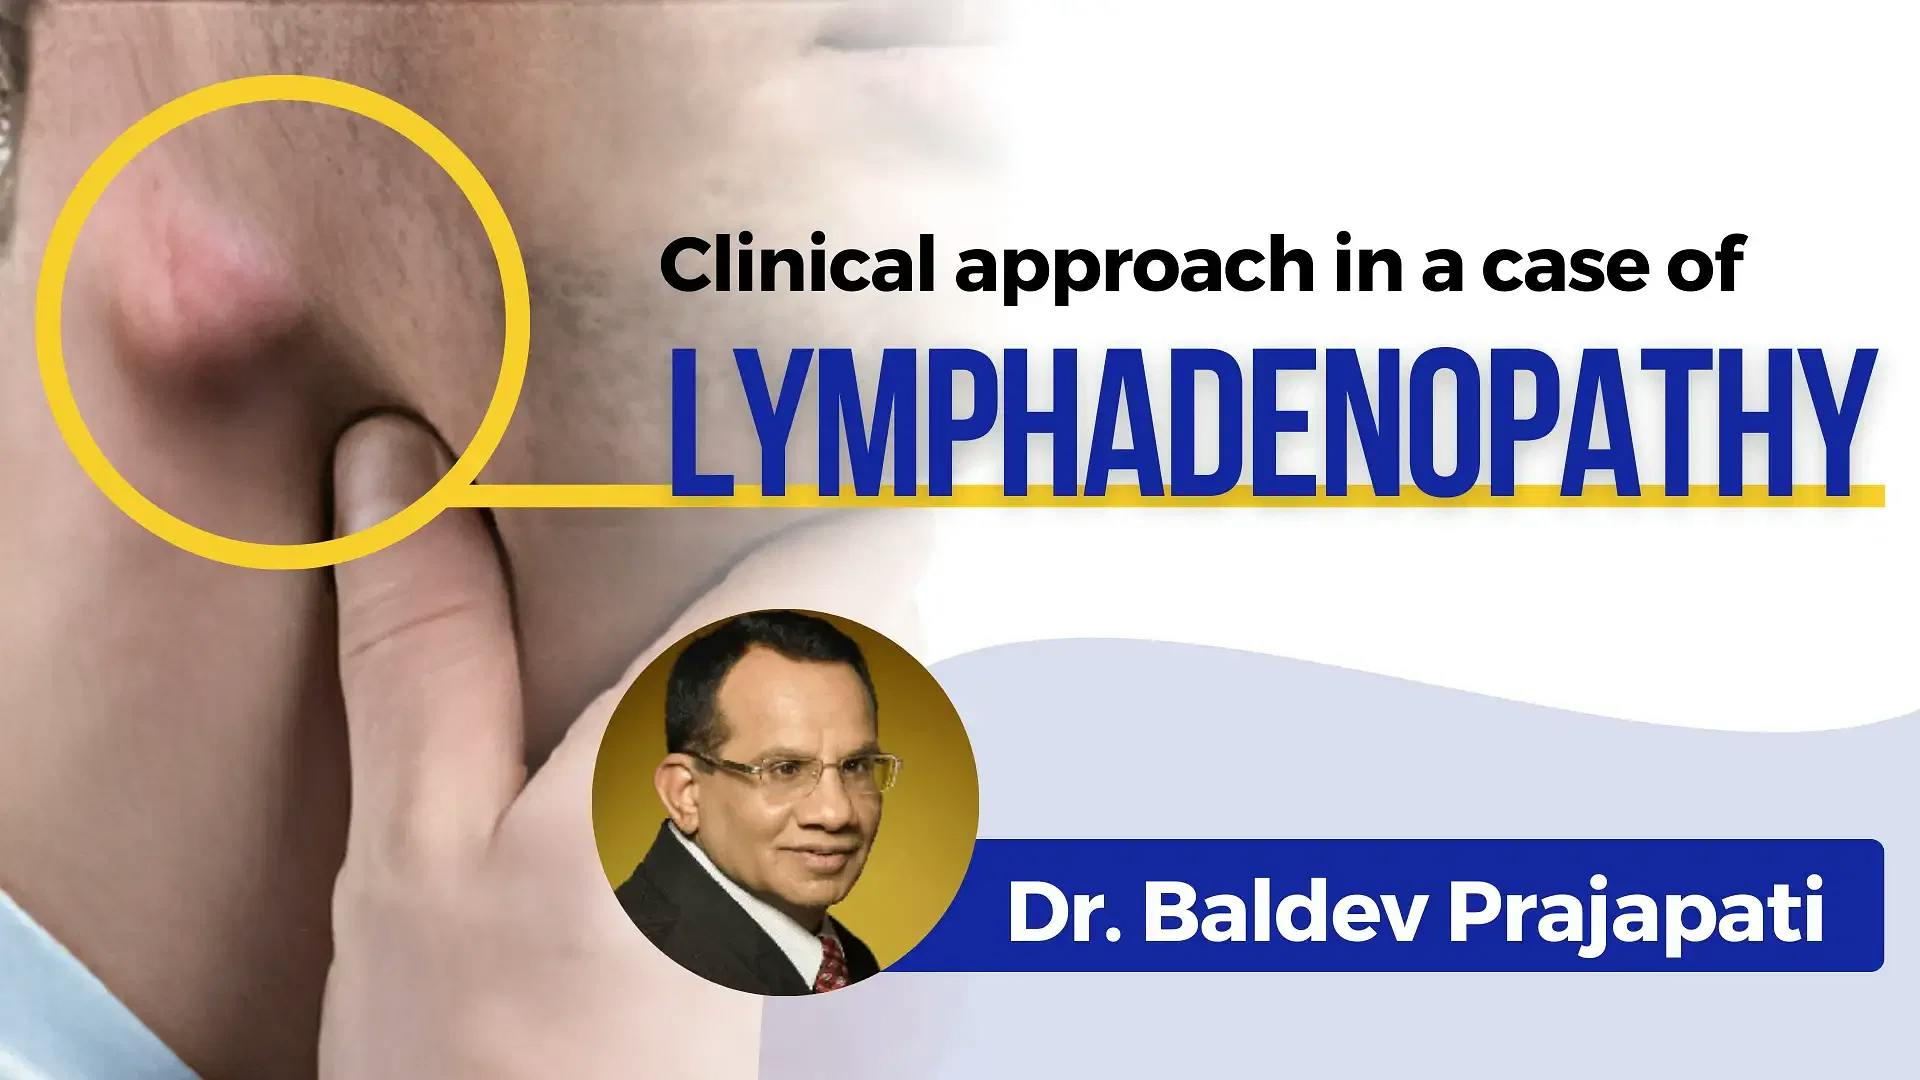 Clinical approach in a case of lymphadenopathy